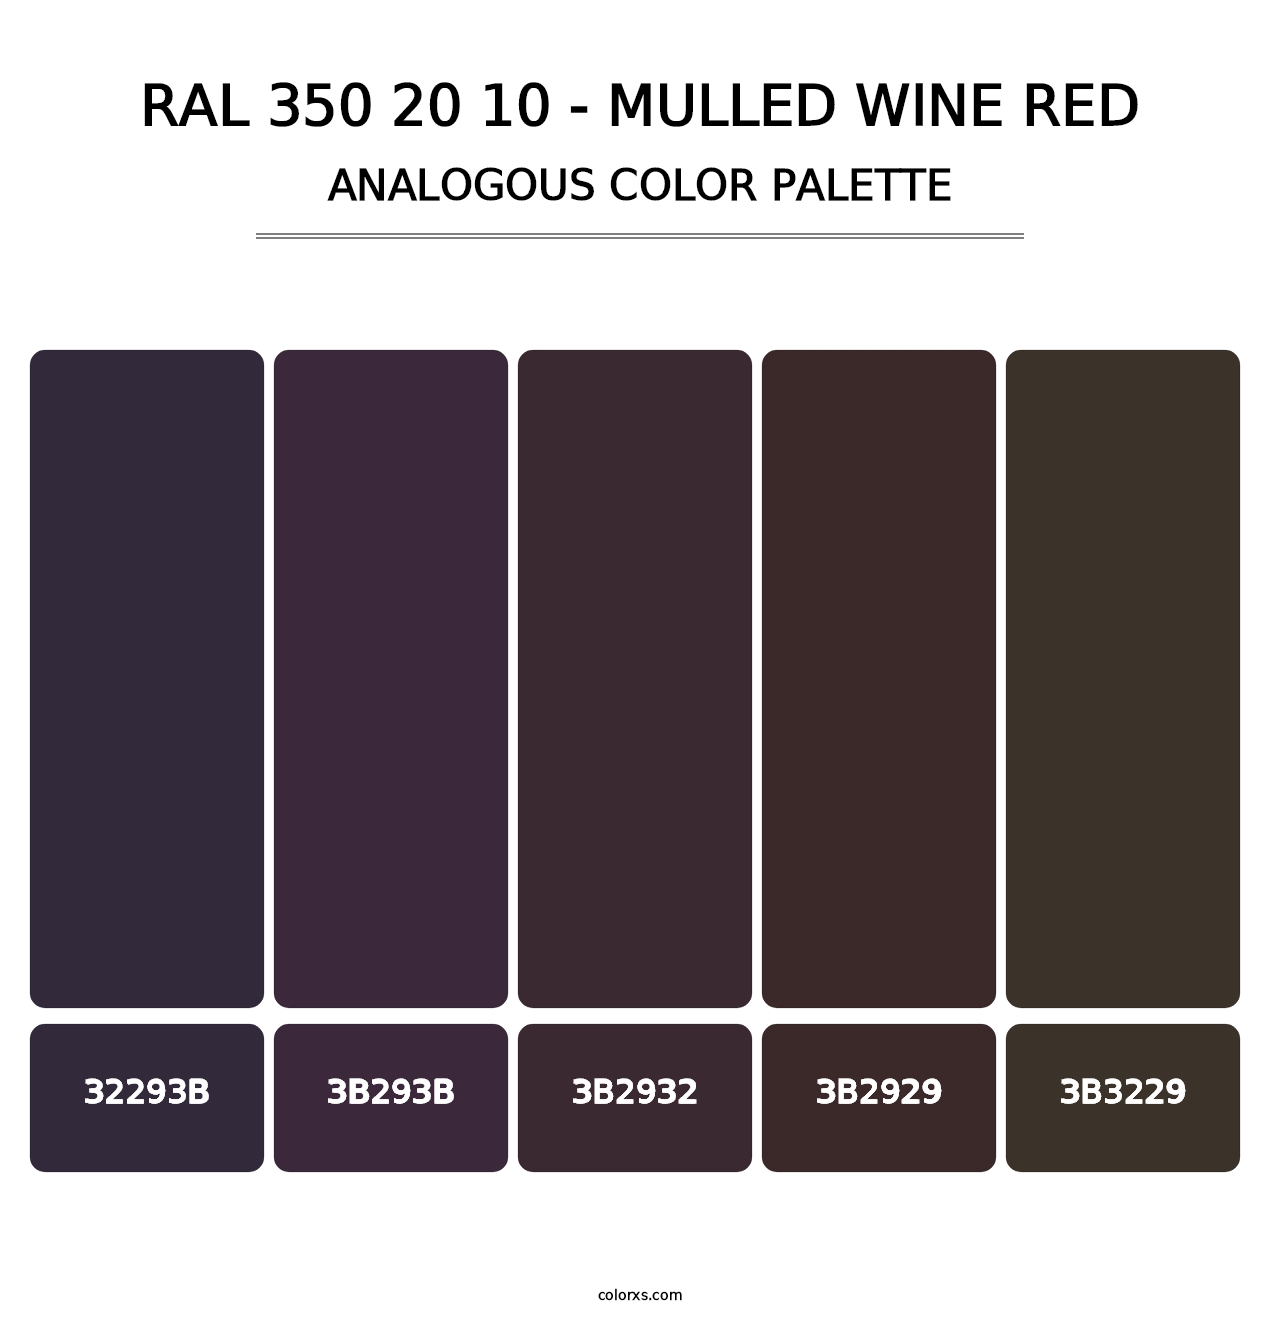 RAL 350 20 10 - Mulled Wine Red - Analogous Color Palette